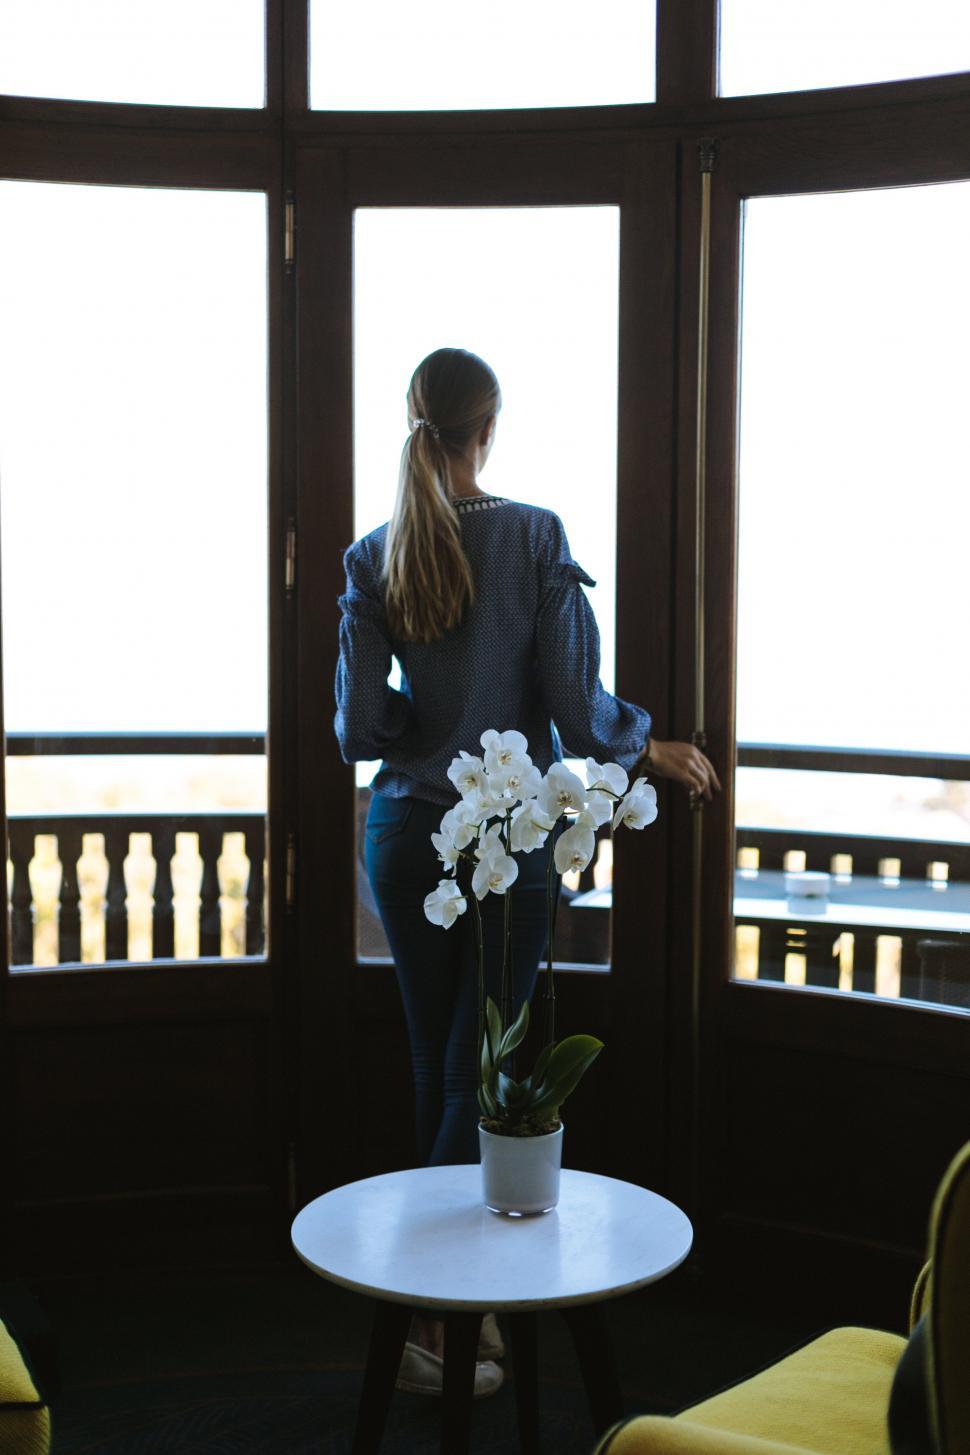 Free Image of A woman standing in front of a window 